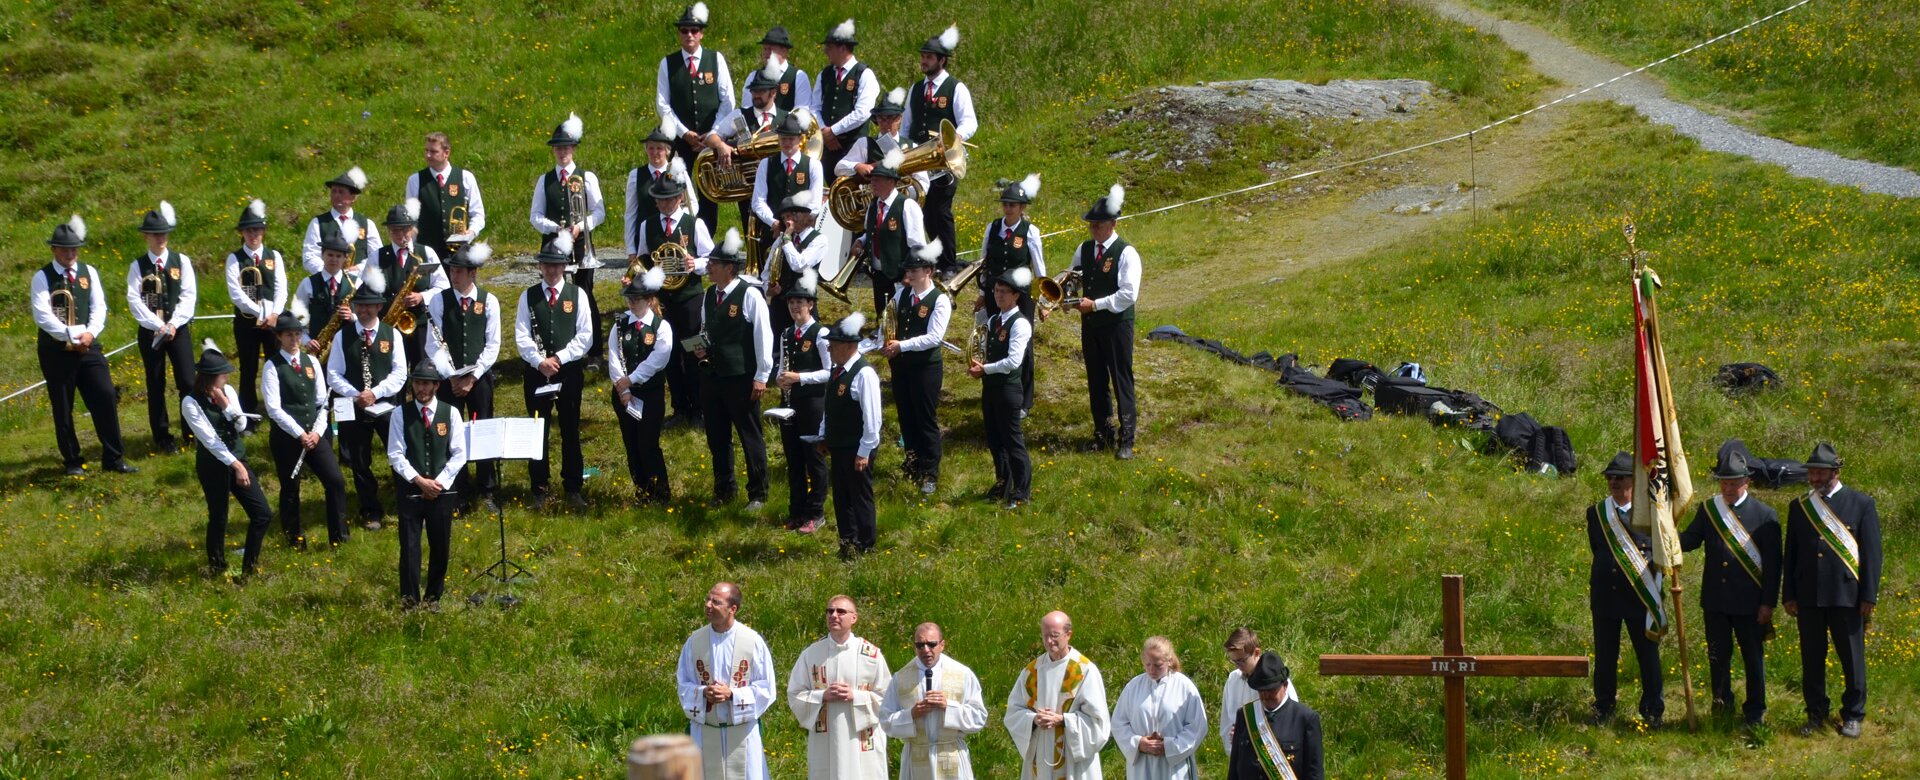 Priests next to a cross and a band in the background